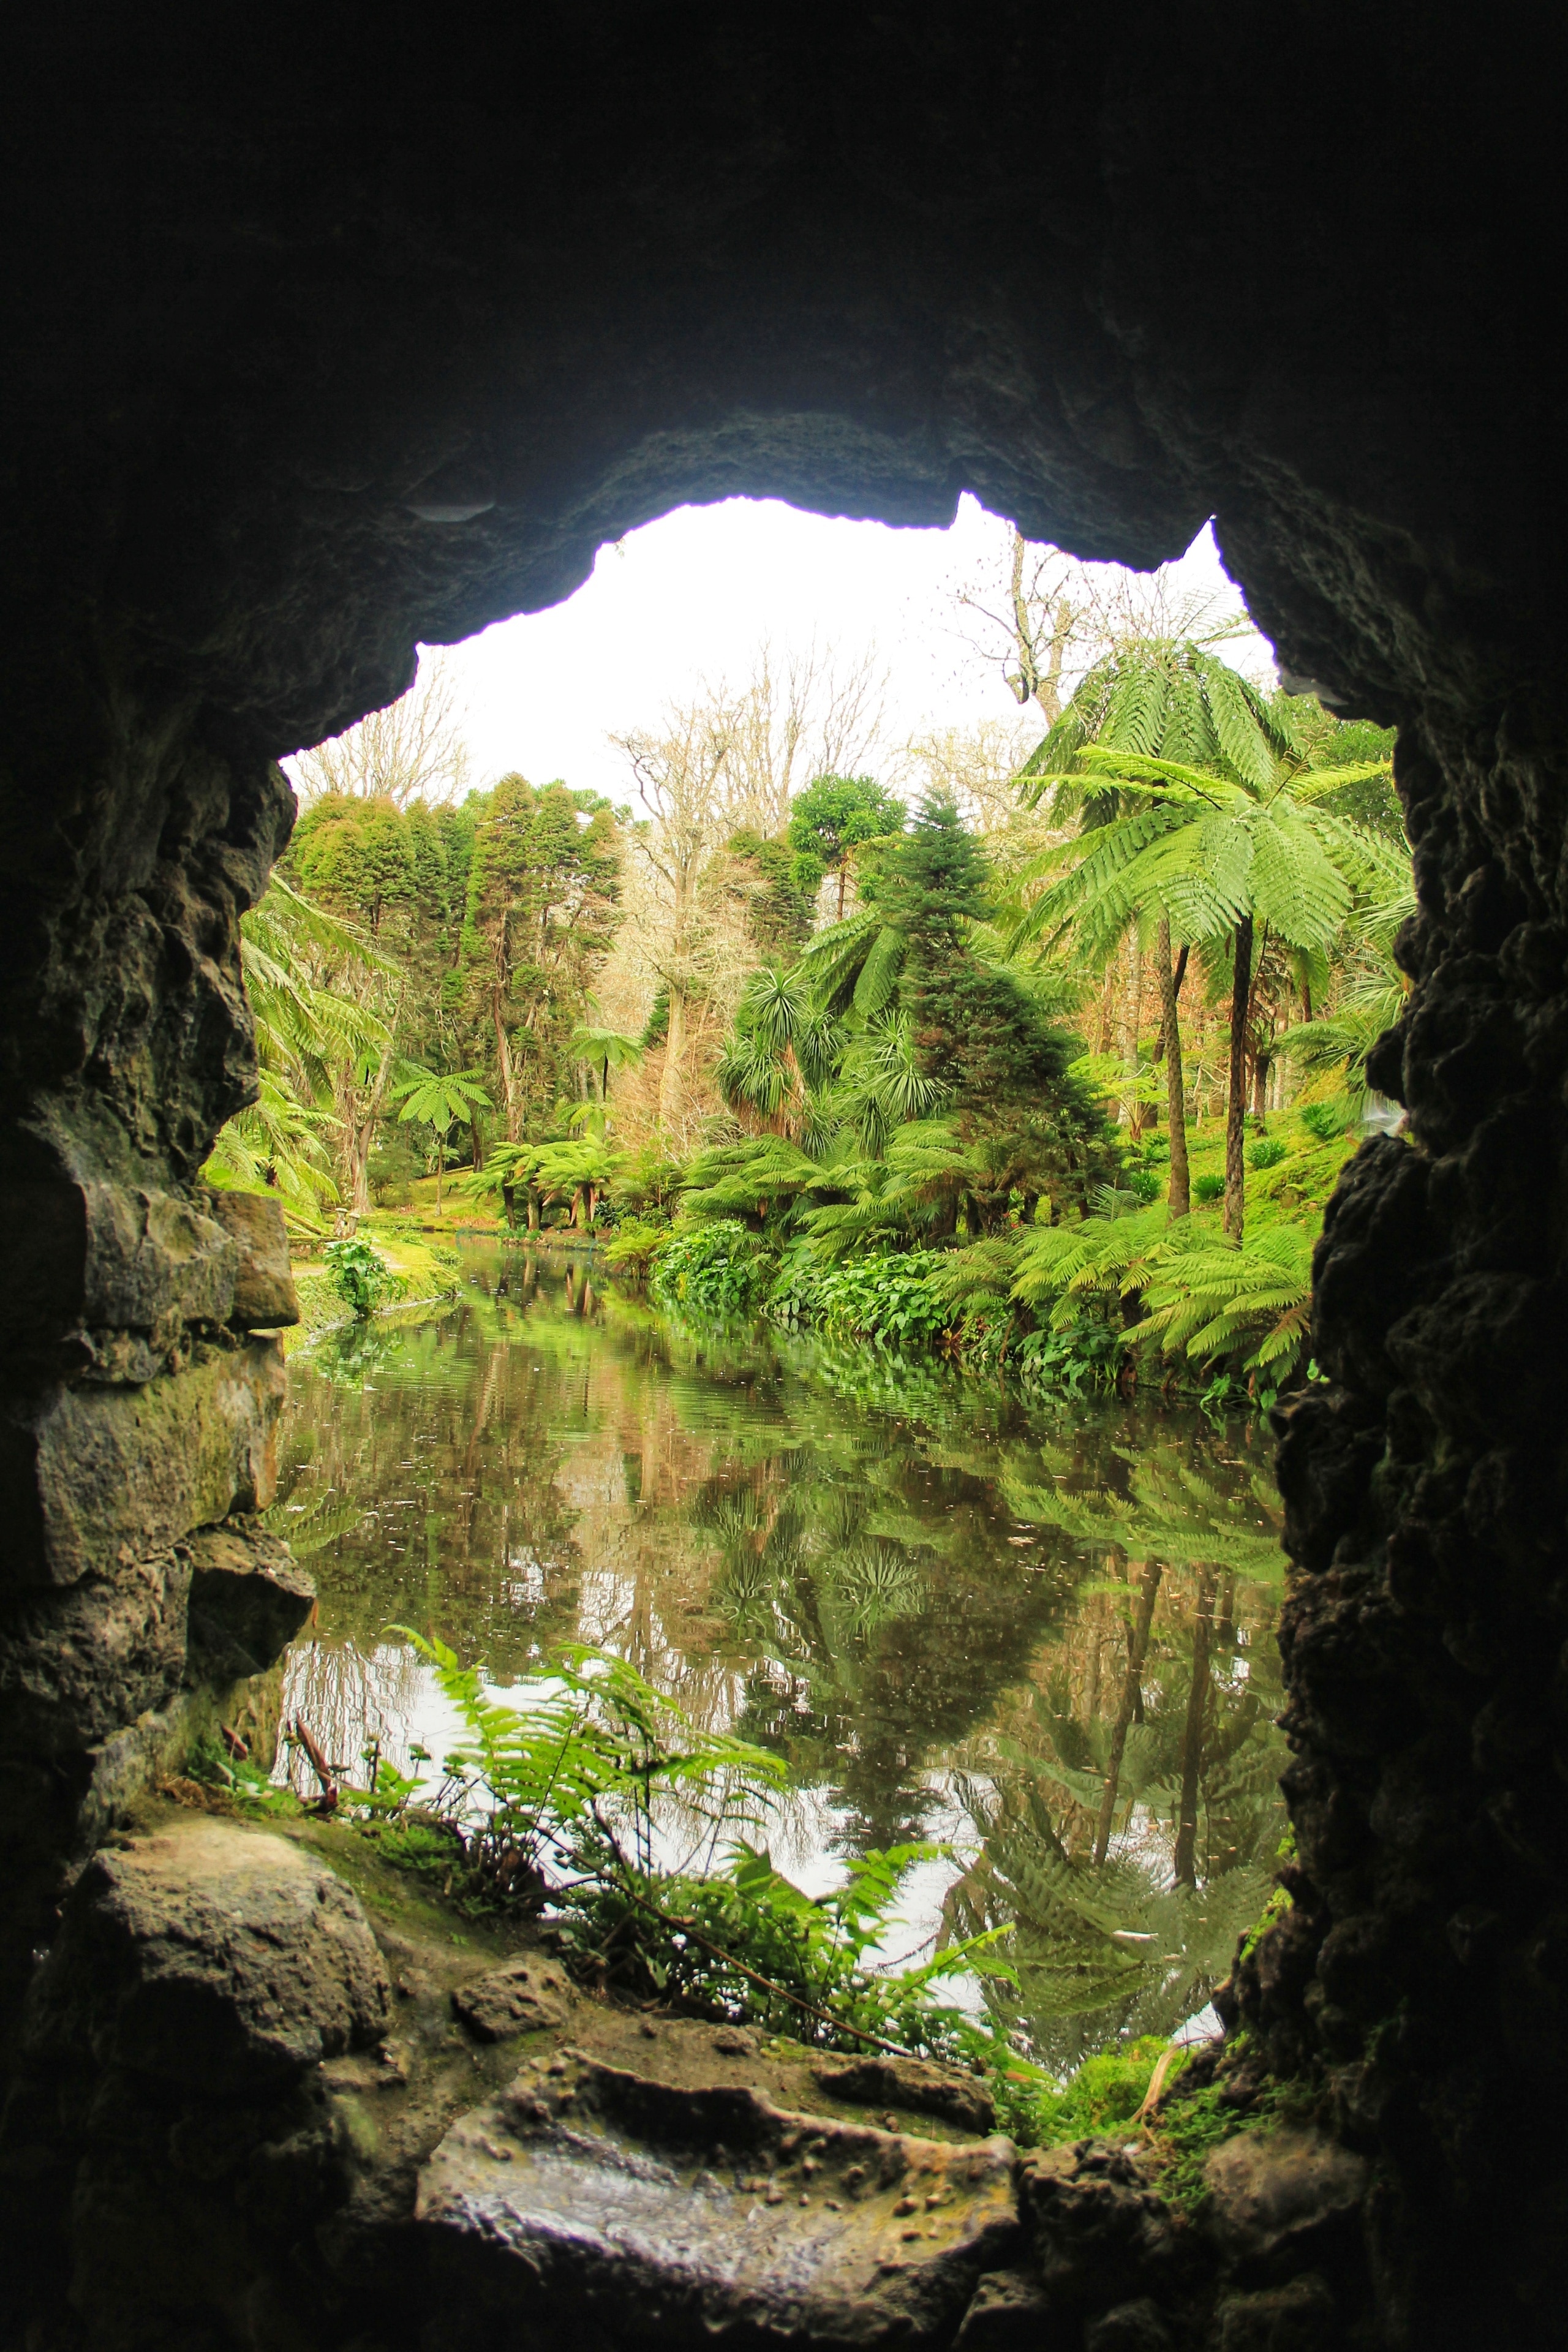 I love it when I find natural frames like this one, shot from inside a cave at Parque Terra Nostra in Furnas, São Miguel.

The beautiful garden is built over a massive 10 hectares and it would be quite easy to spend the best part of a day here. There are walking trails, waterfalls, and a massive amount of plants and flowers to photograph and enjoy. 

Definitely one of the best photo spots on the island if you're into nature and fancy yourself as a bit of a botanist 🌿🌺

You can read more about how to seek out all the best photo spots on São Miguel here:

https://galloparoundtheglobe.com/how-to-seek-out-the-best-photo-spots-on-sao-miguel-the-azores/